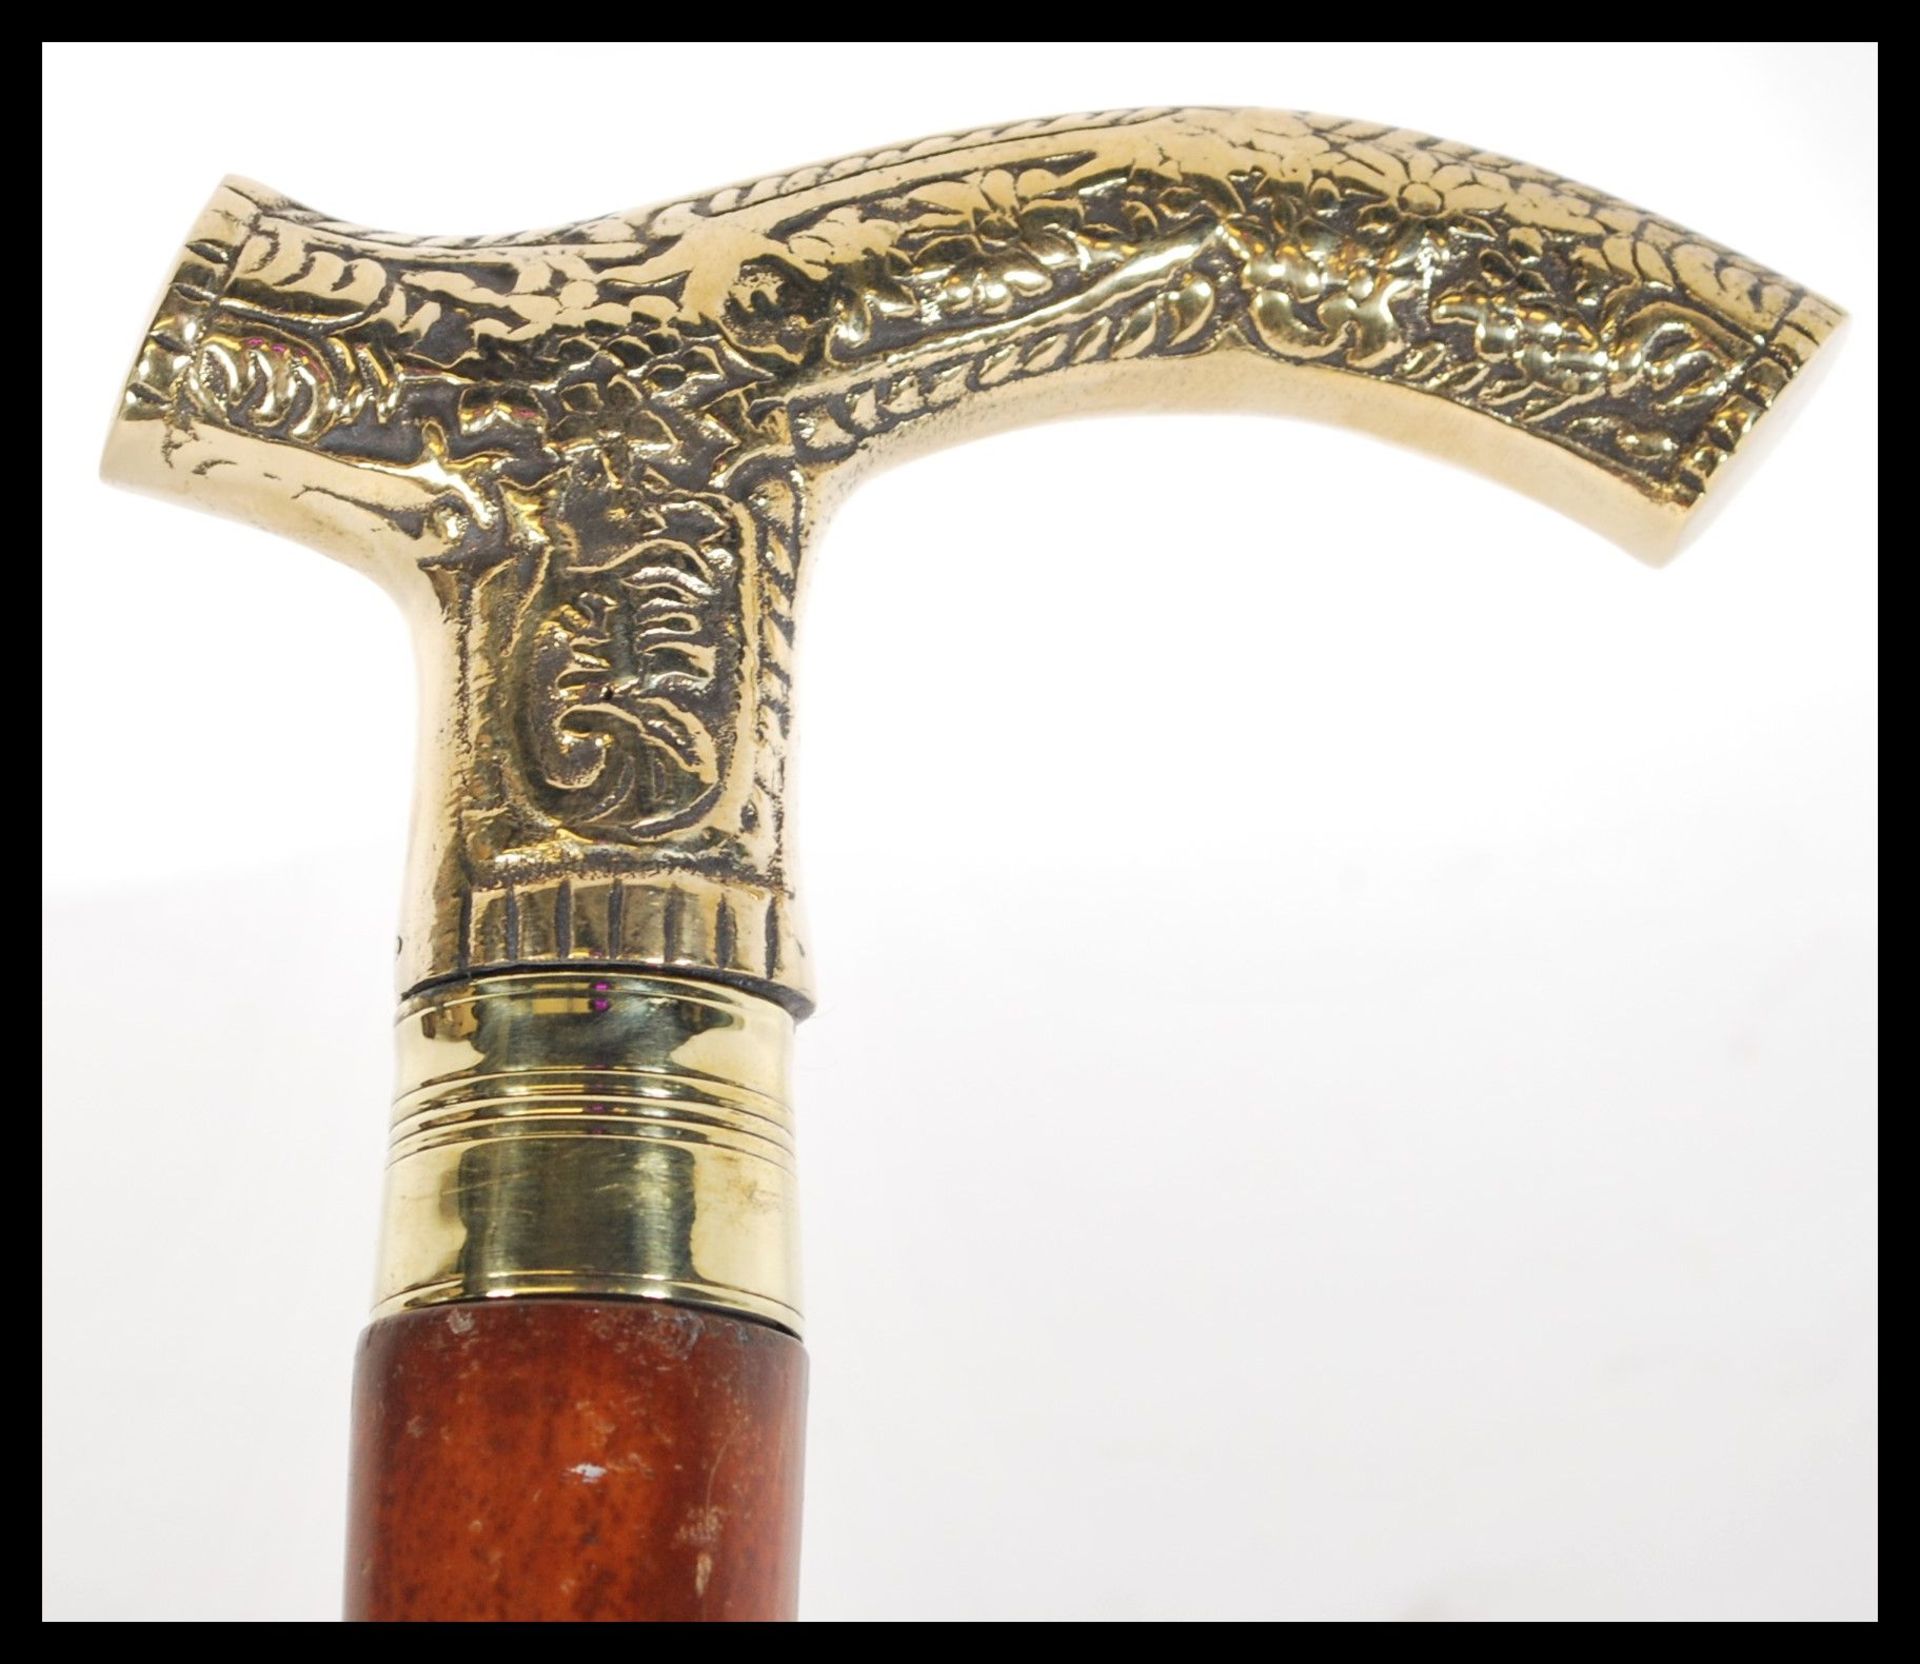 A malacca walking stick having a brass hooked handle having embossed floral detailing. Measures